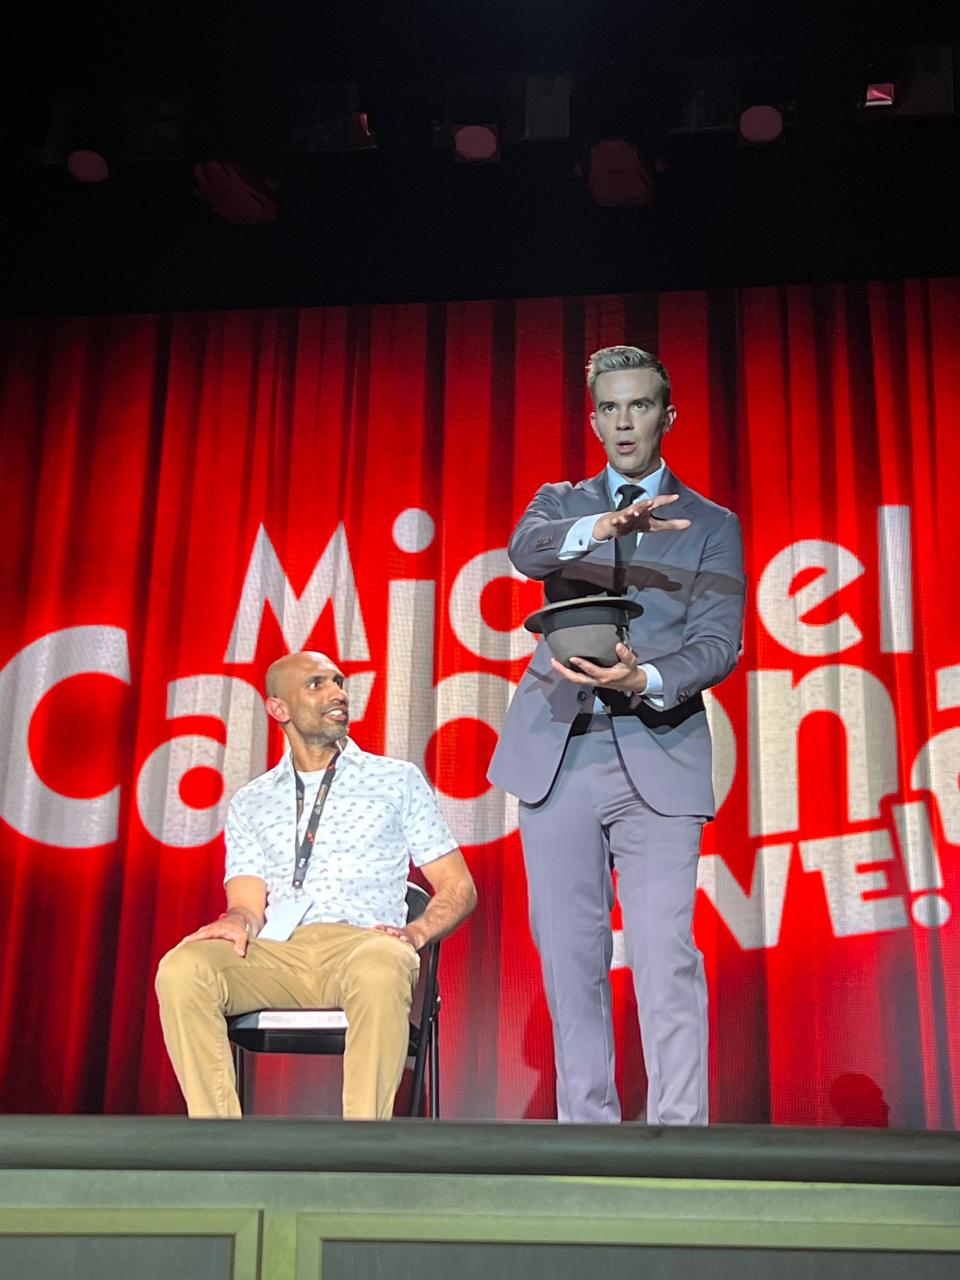 Ronak Patel on stage with magician Michael Carbonaro.